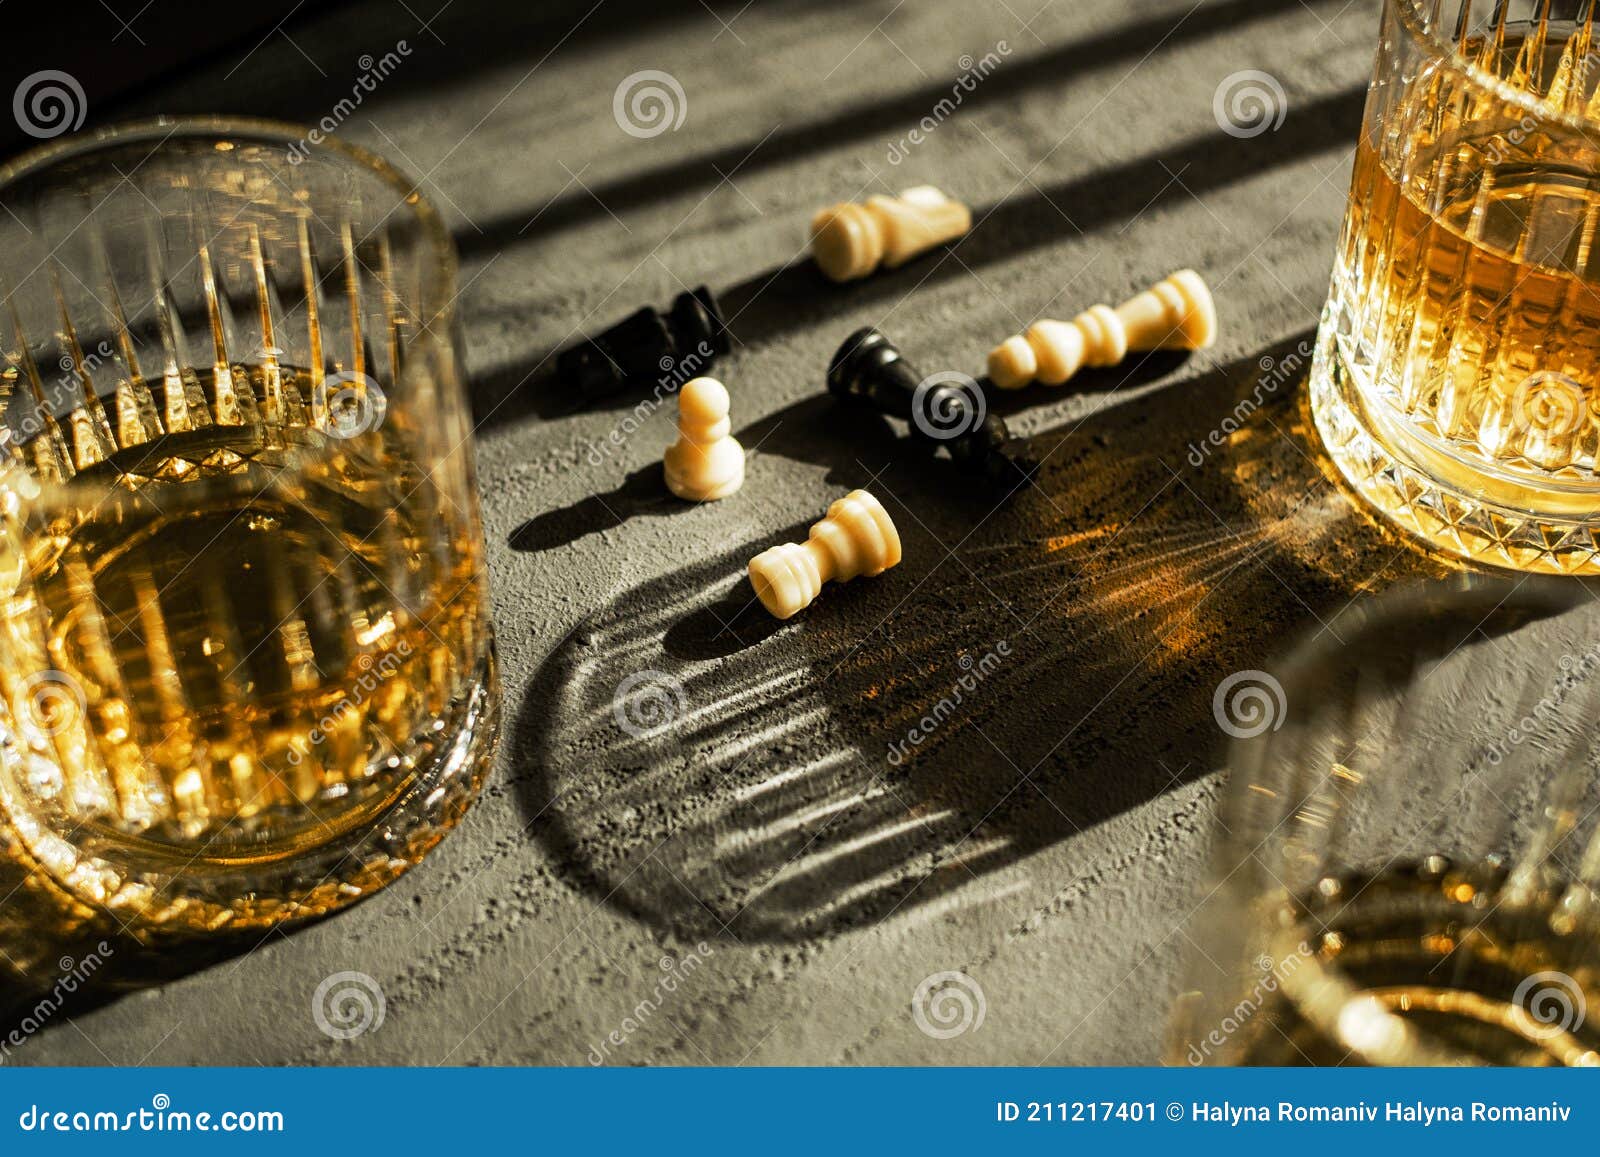 playing chess on alcohol. top view